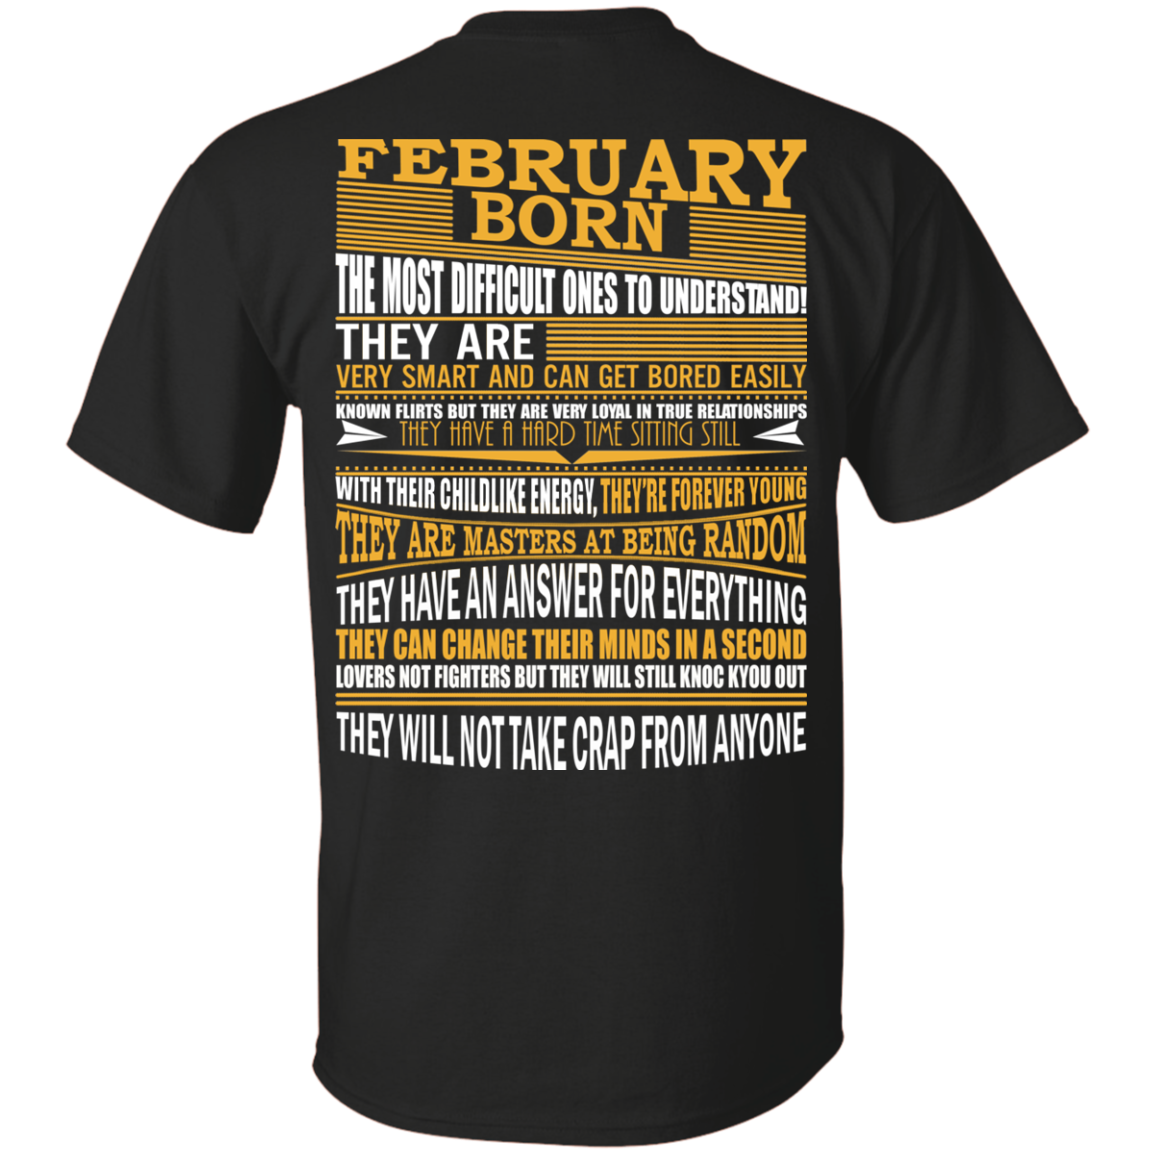 February Born - The Most Difficult Ones To Understand Shirt - Back Design